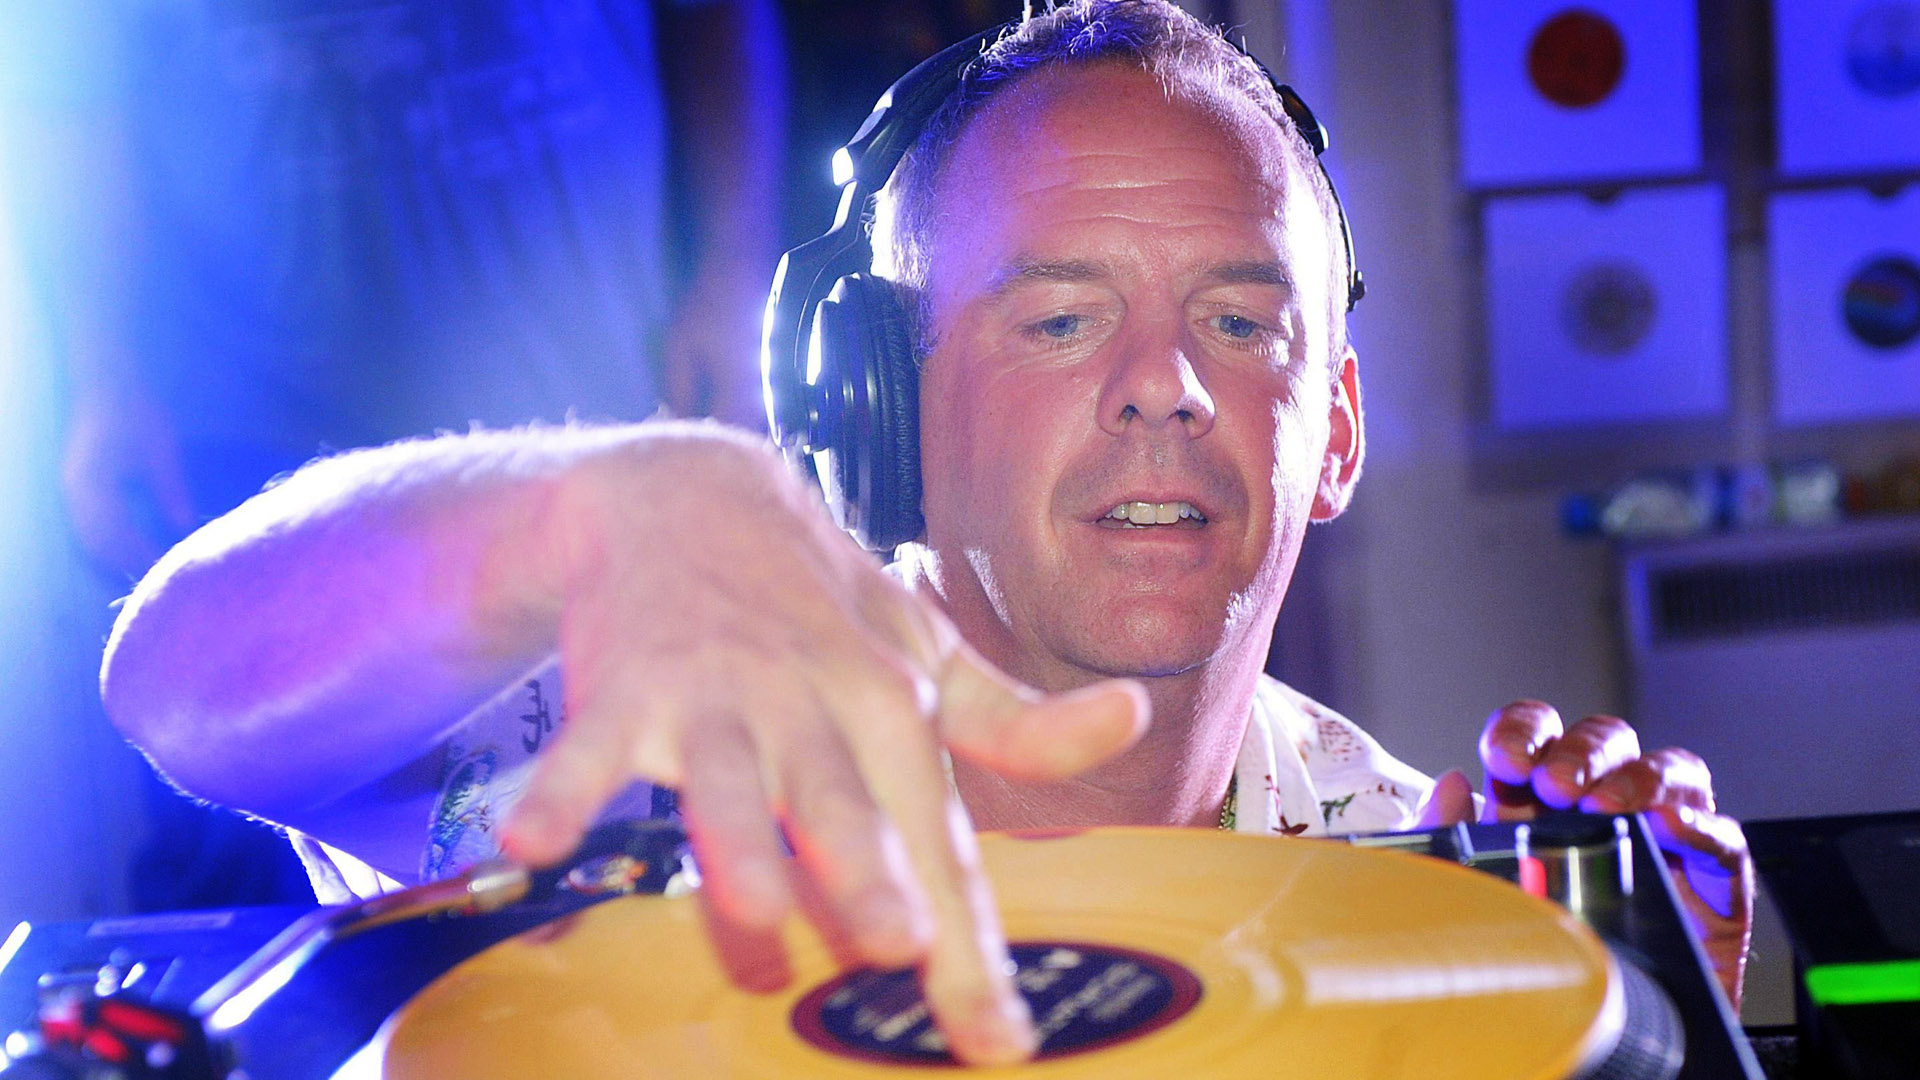 Fatboy Slim wallpapers, Music HQ, 4K pictures, 1920x1080 Full HD Desktop